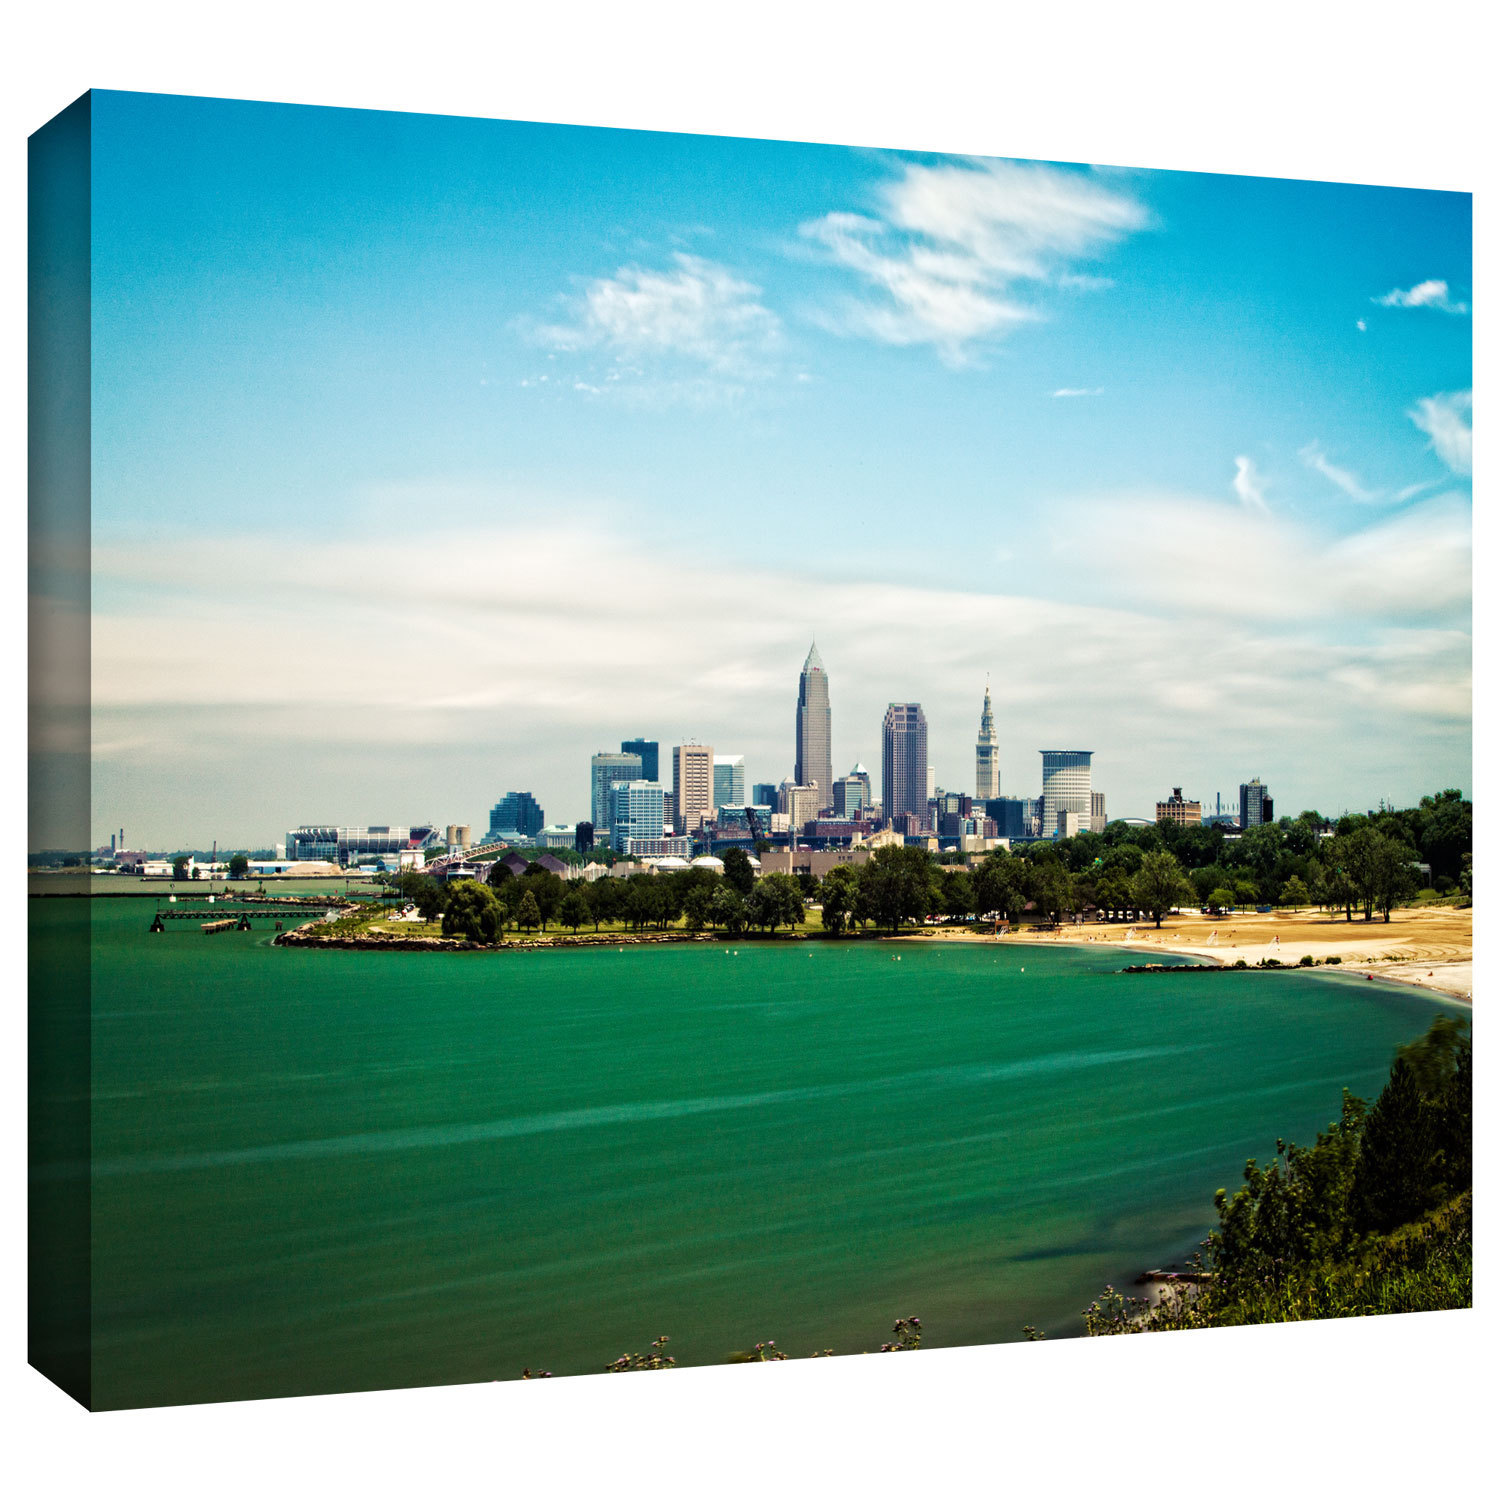 Cody York 'Cleveland 22' Gallery-wrapped Canvas